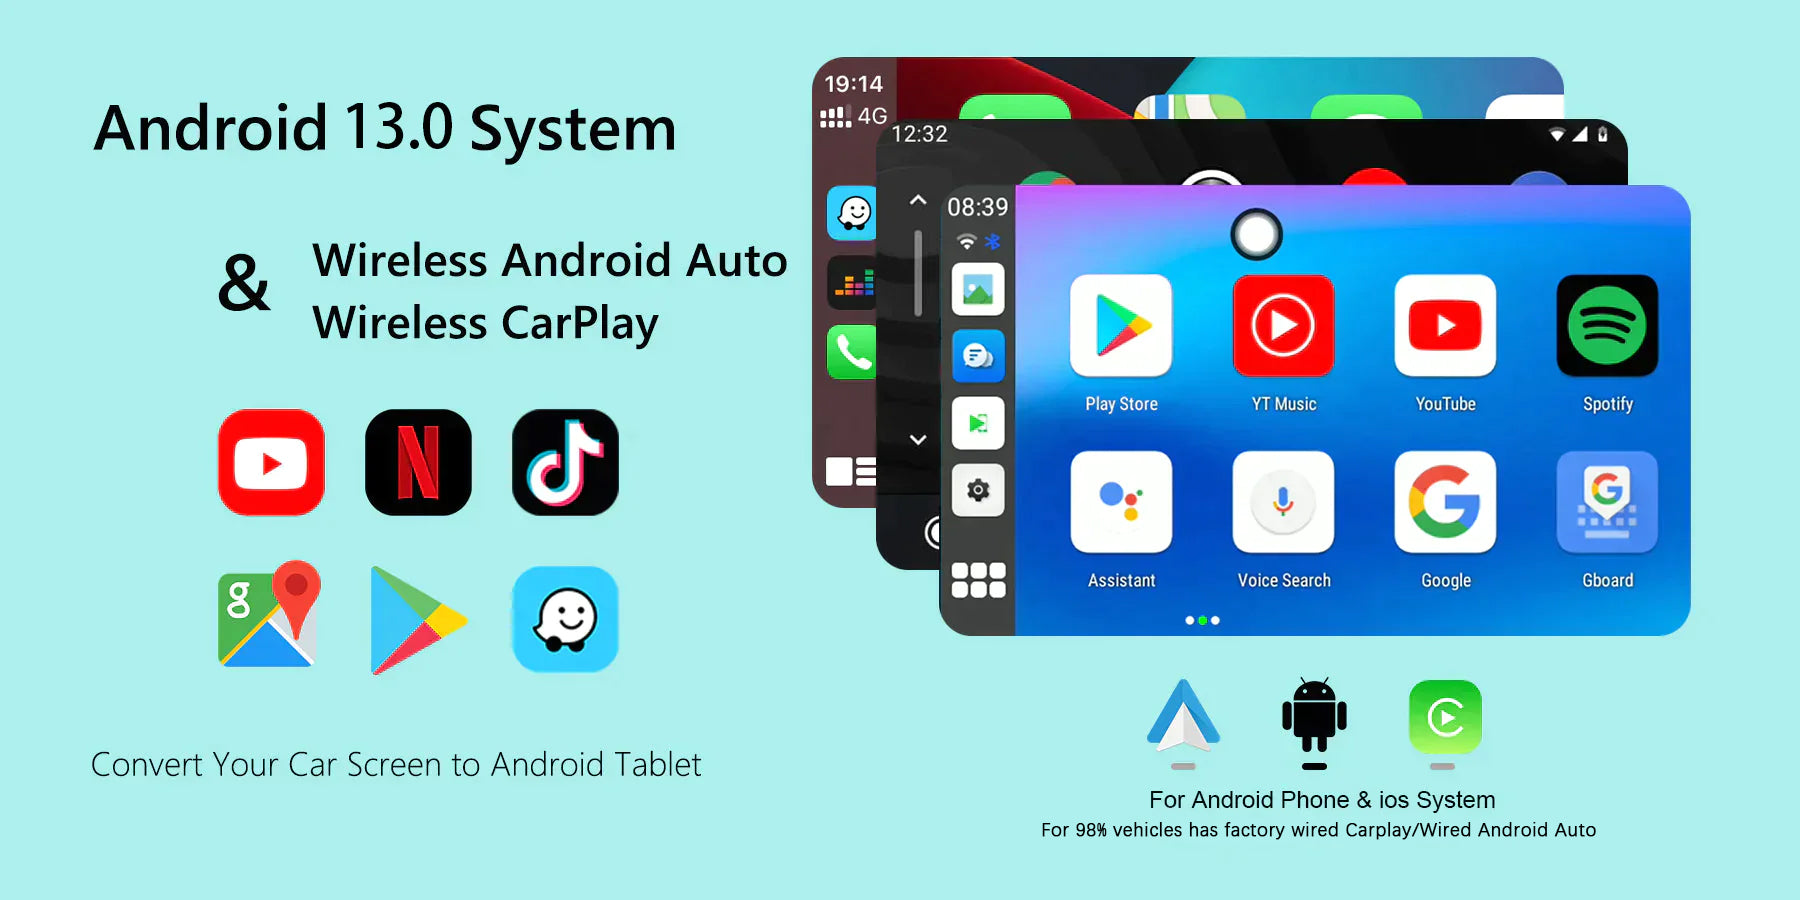 Carlinkit-Tbox-Plus-Wireless-Carplay-Adapter-met-een-Android-13-systeem